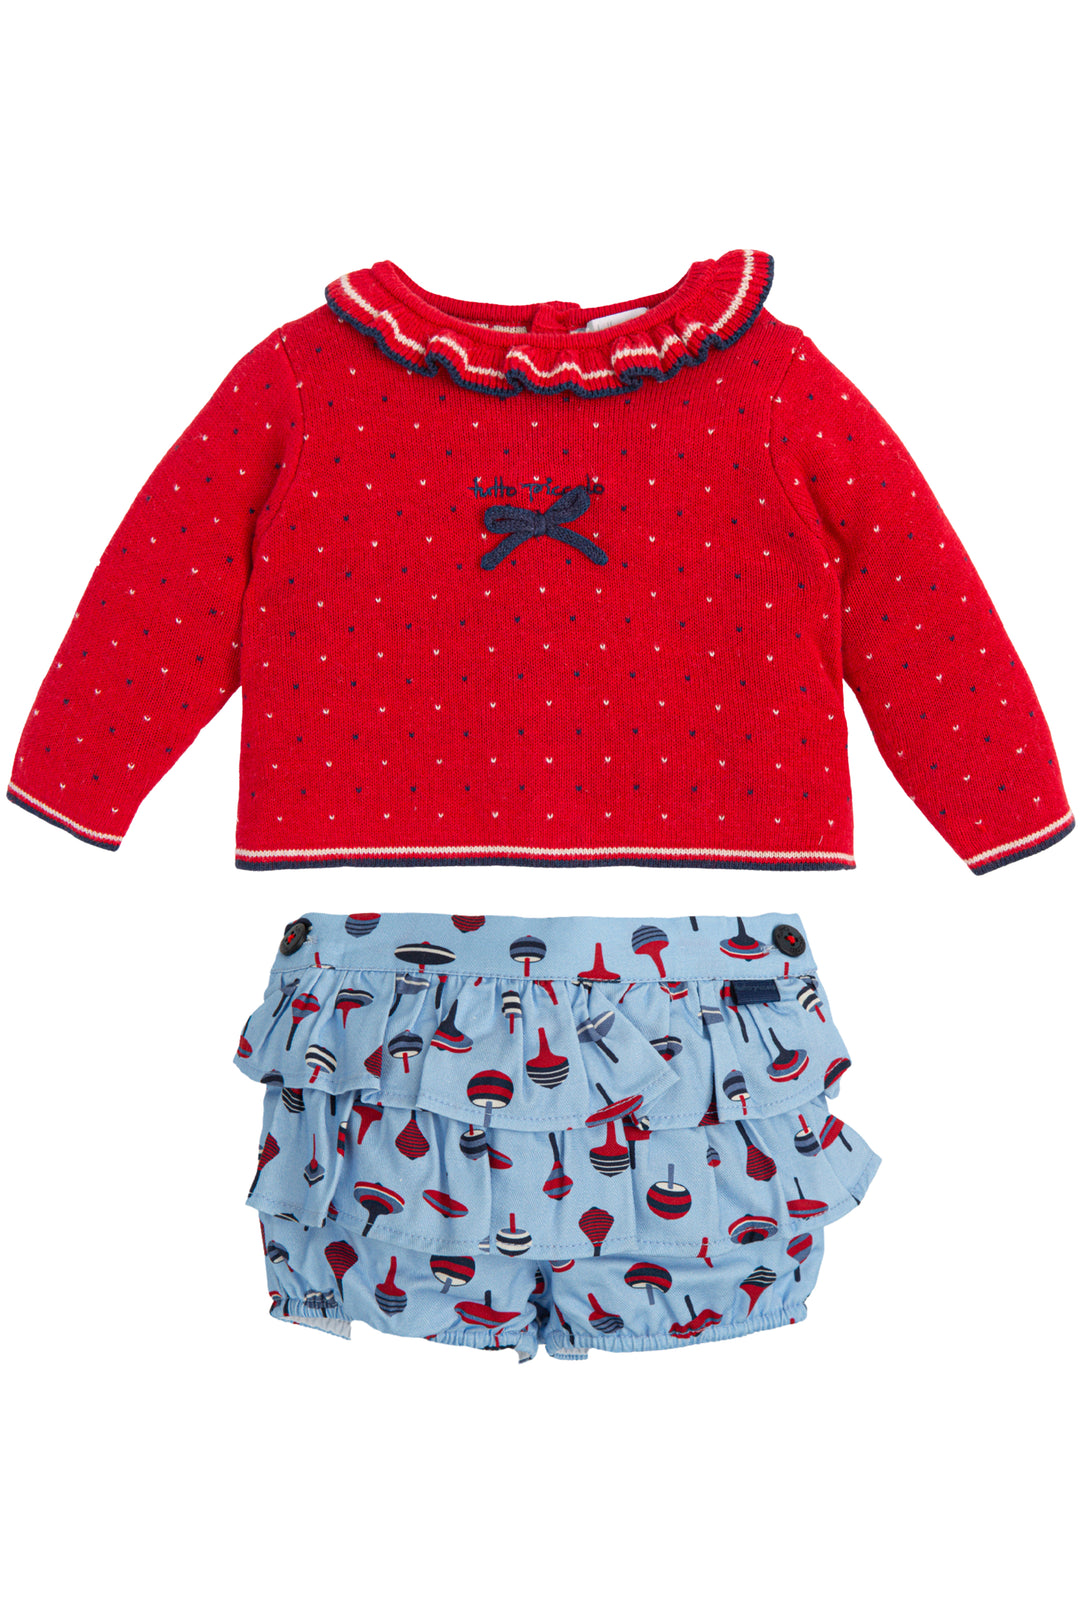 Tutto Piccolo "Myla" Red Knit Jumper & Ruffle Bloomers | Millie and John